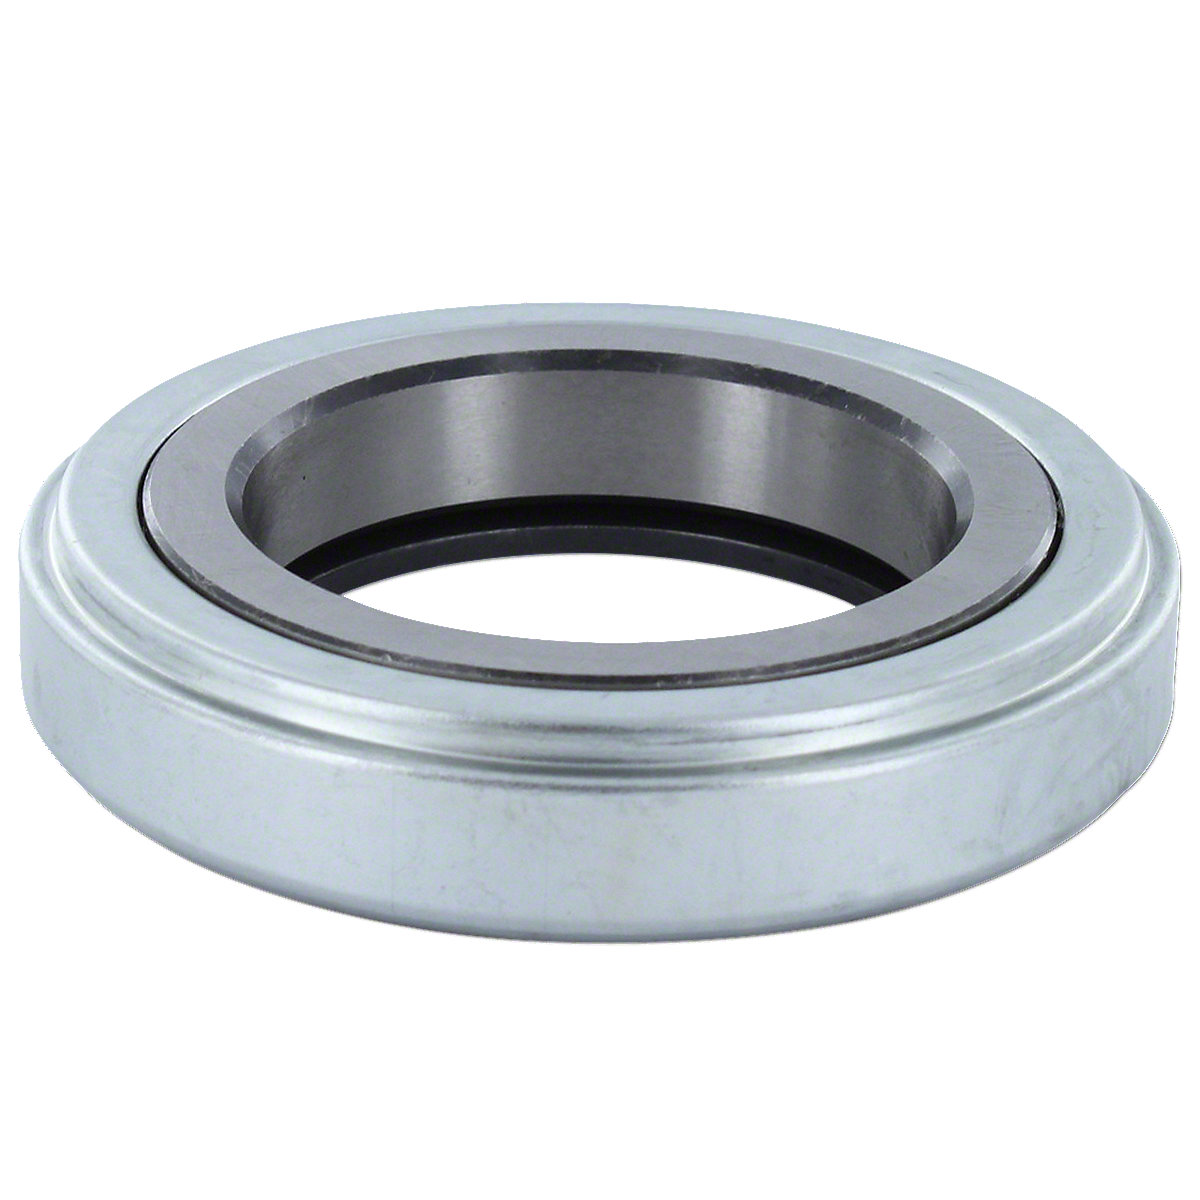 Clutch Throw Out Bearing For Massey Ferguson: F40, TO35, 25, 35, 50.